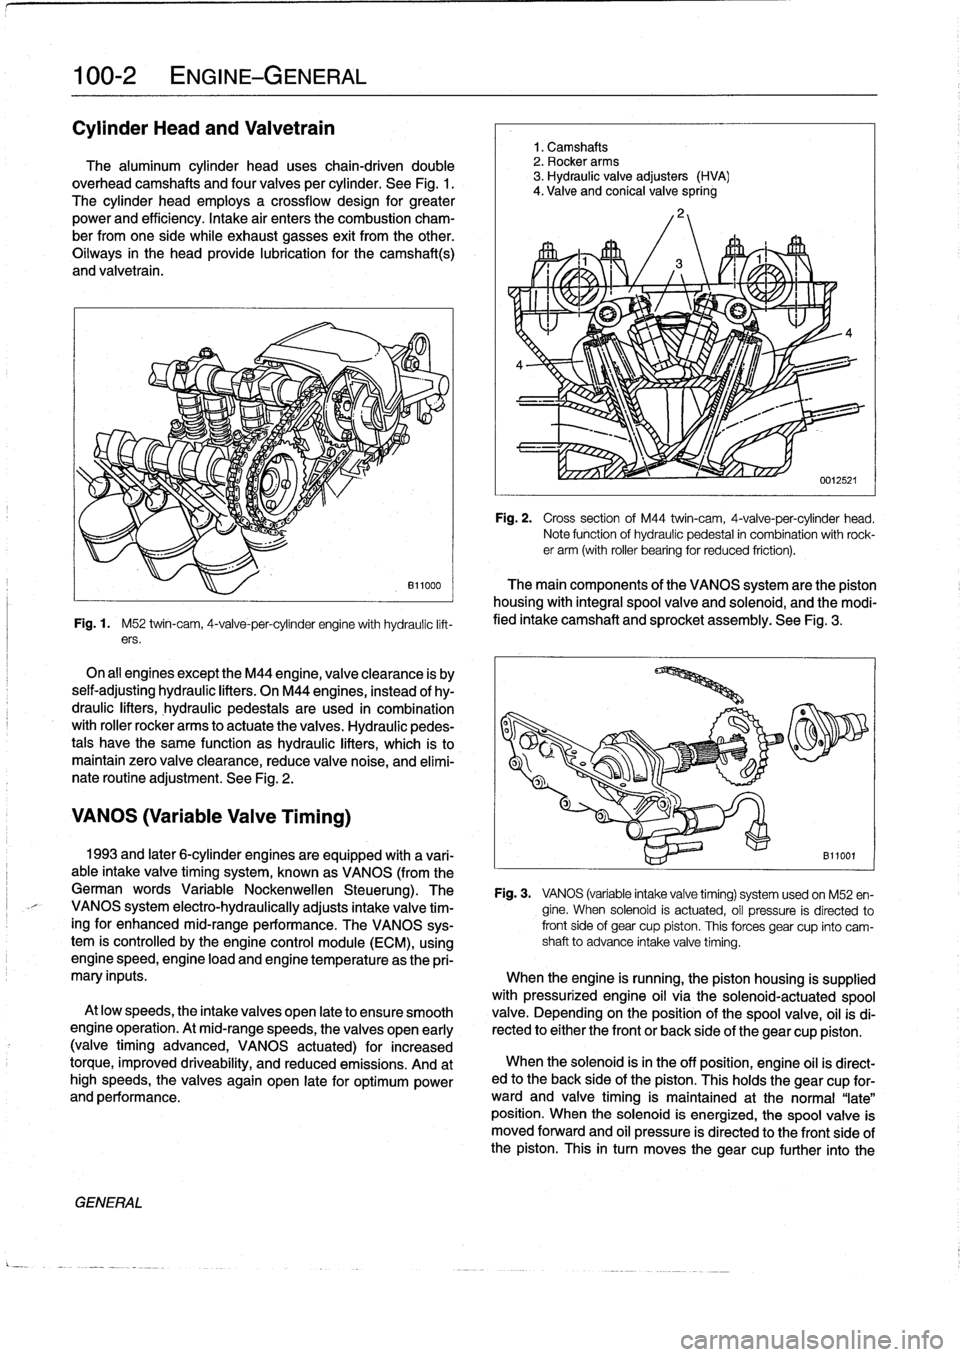 BMW 328i 1998 E36 Workshop Manual 
100-2
ENGINE-GENERAL

Cylinder
Head
and
Valvetrain

The
aluminum
cylinder
head
uses
chain-driven
double
overhead
camshafts
and
four
valves
per
cylinder
.
See
Fig
.
1
.

The
cylinder
head
employs
a
cr